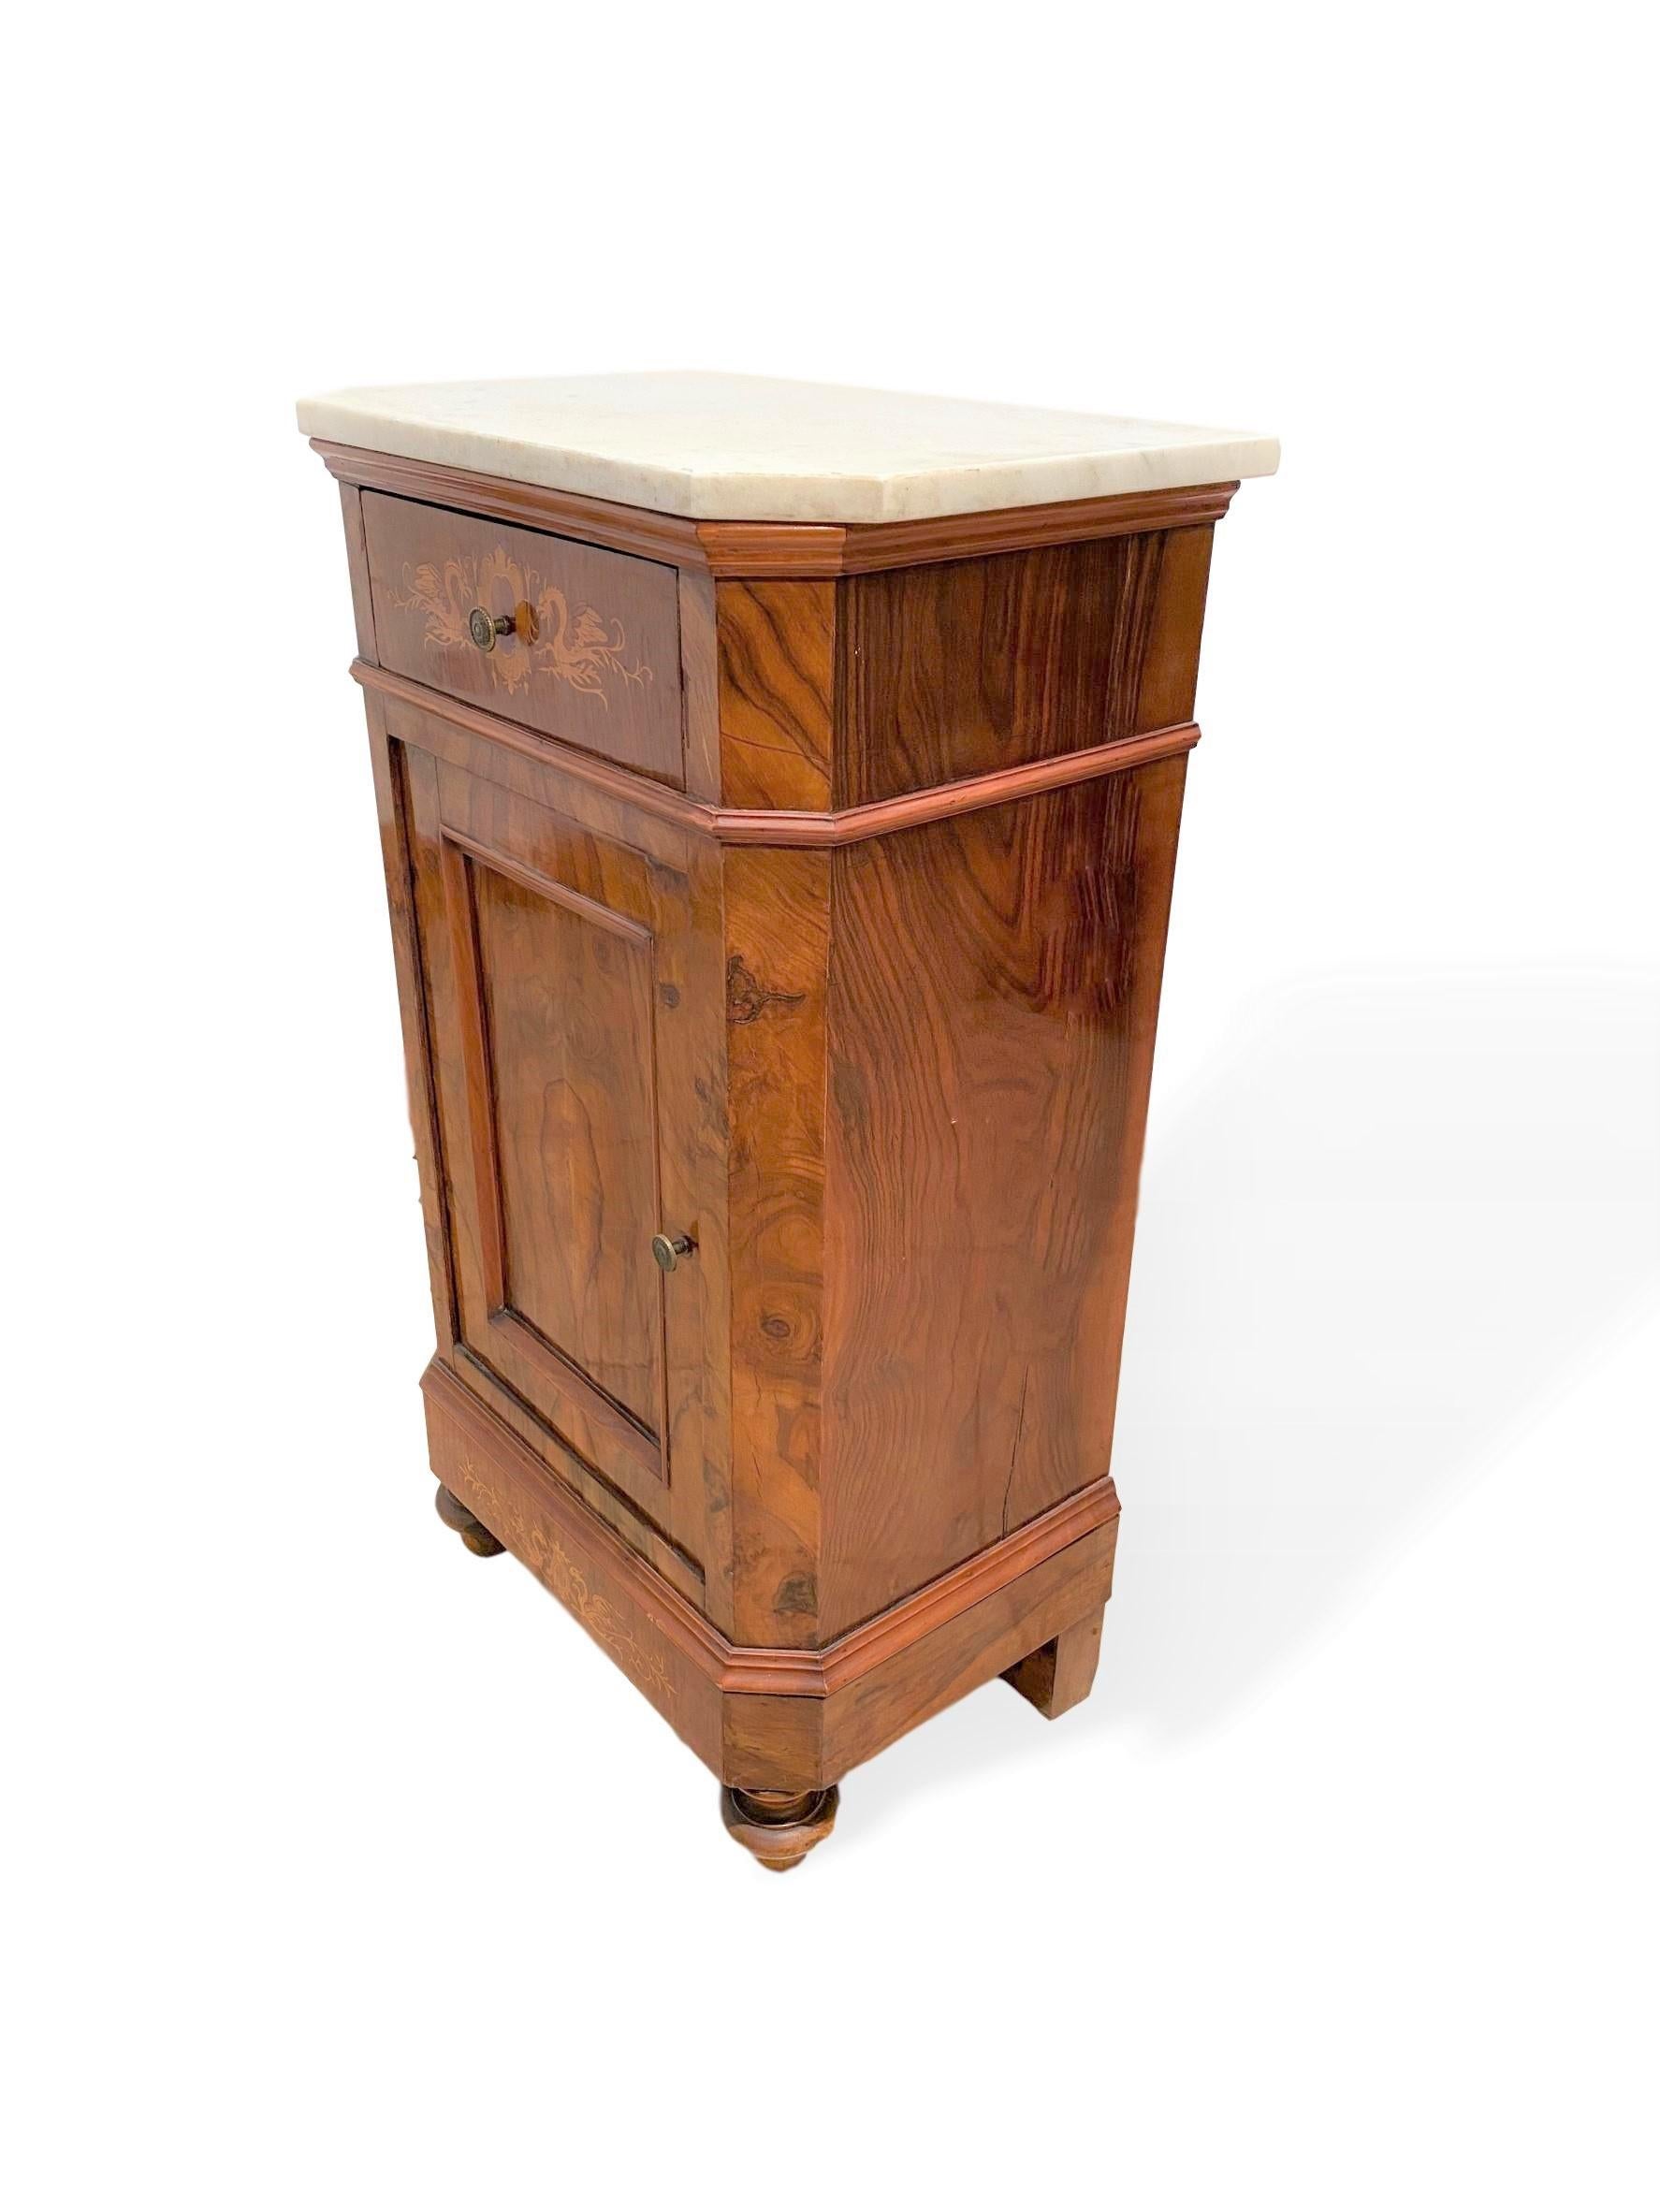 Marble-Top Side Cabinet, Figured Burl Walnut with Marquetry Inlay, Italian, 1880 2